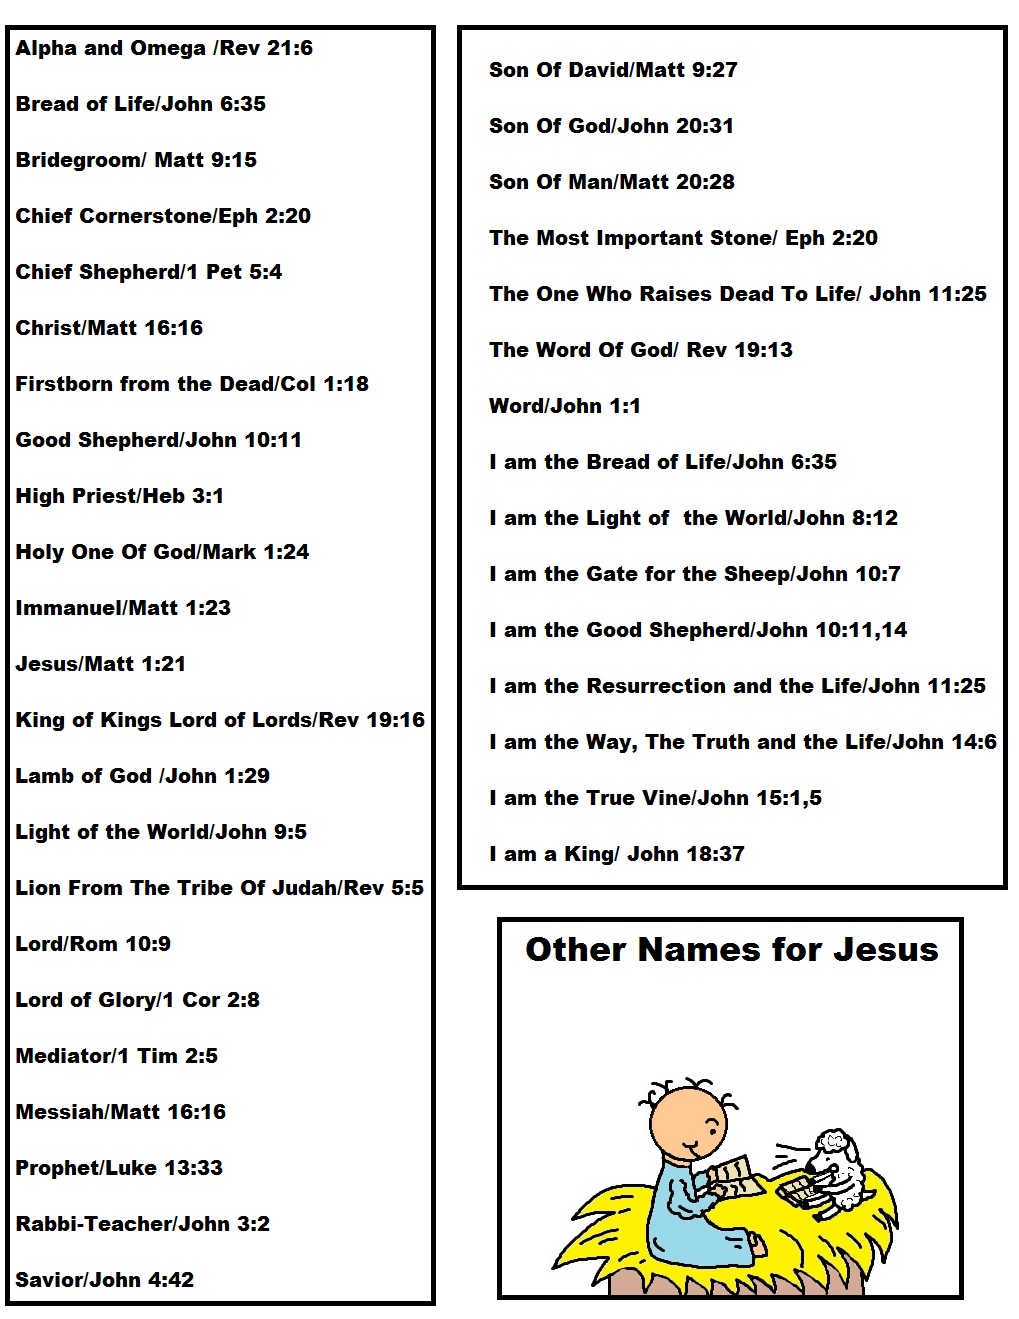 Other Names For Jesus